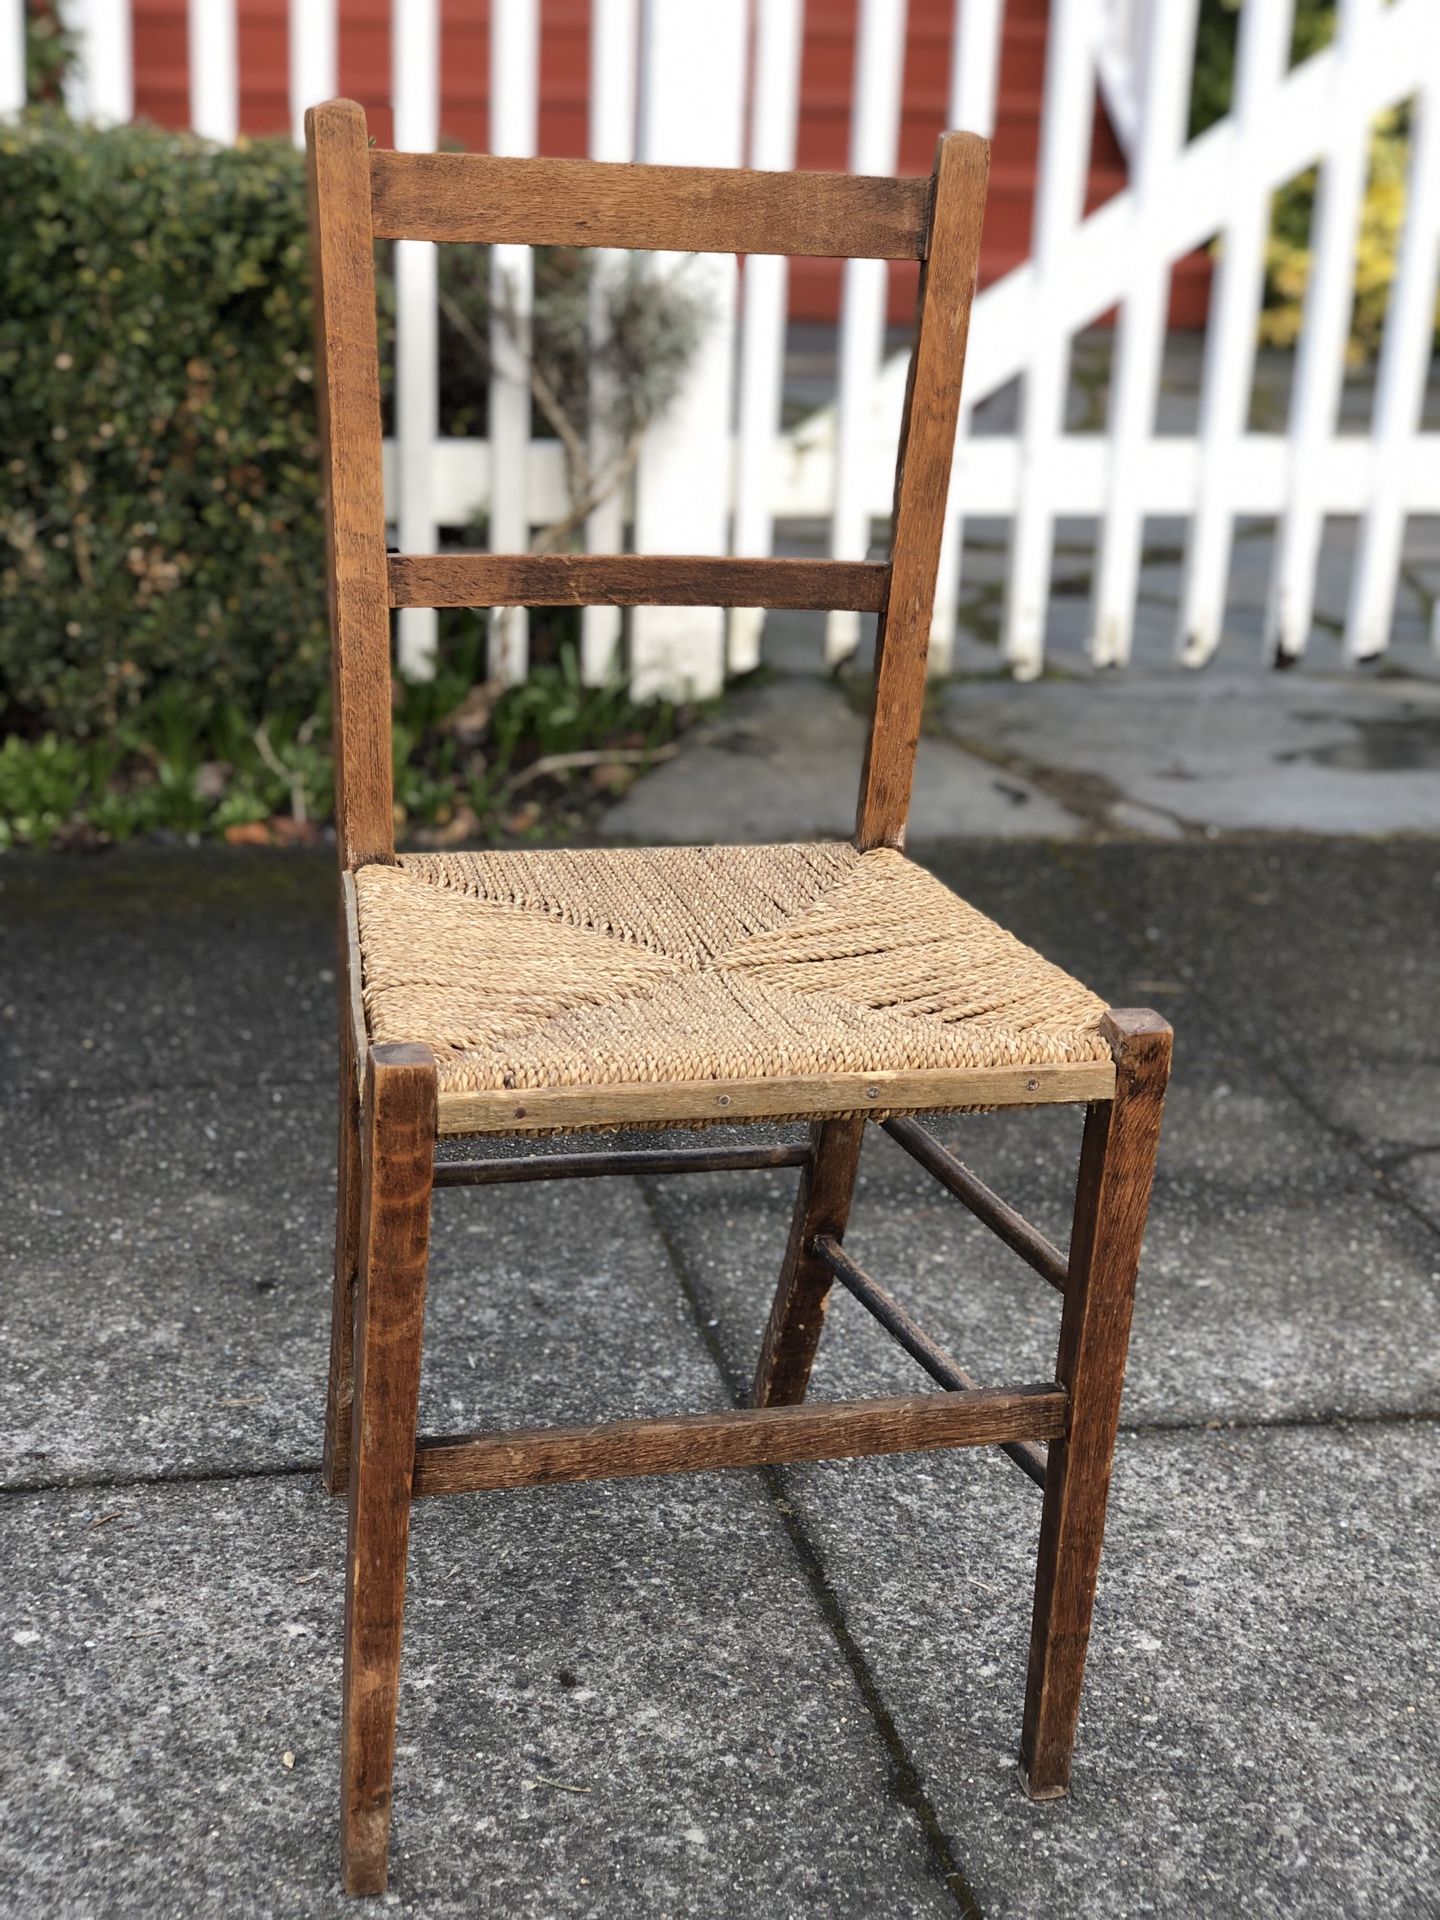 Darling Antique Rush Chair! Old!